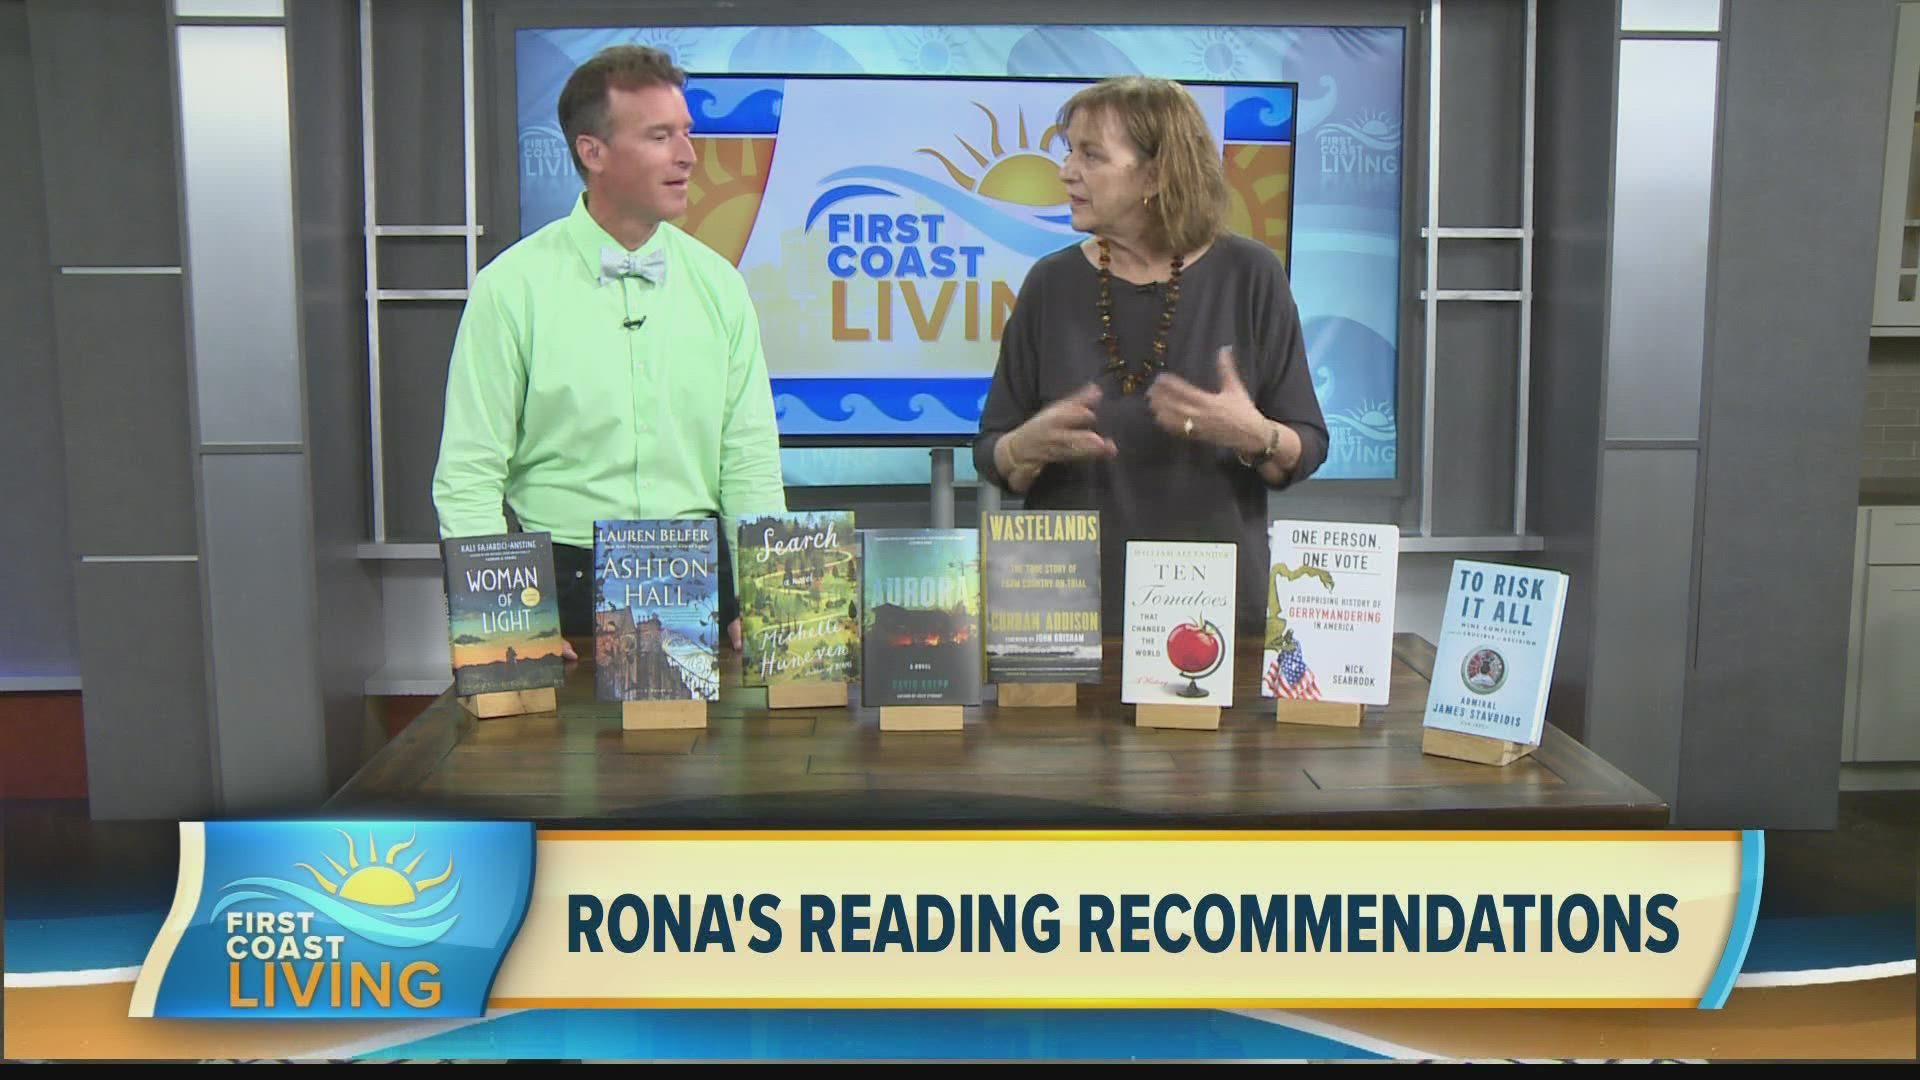 Rona Brinlee, the owner of The BookMark in Neptune Beach is back with more great page-turners!